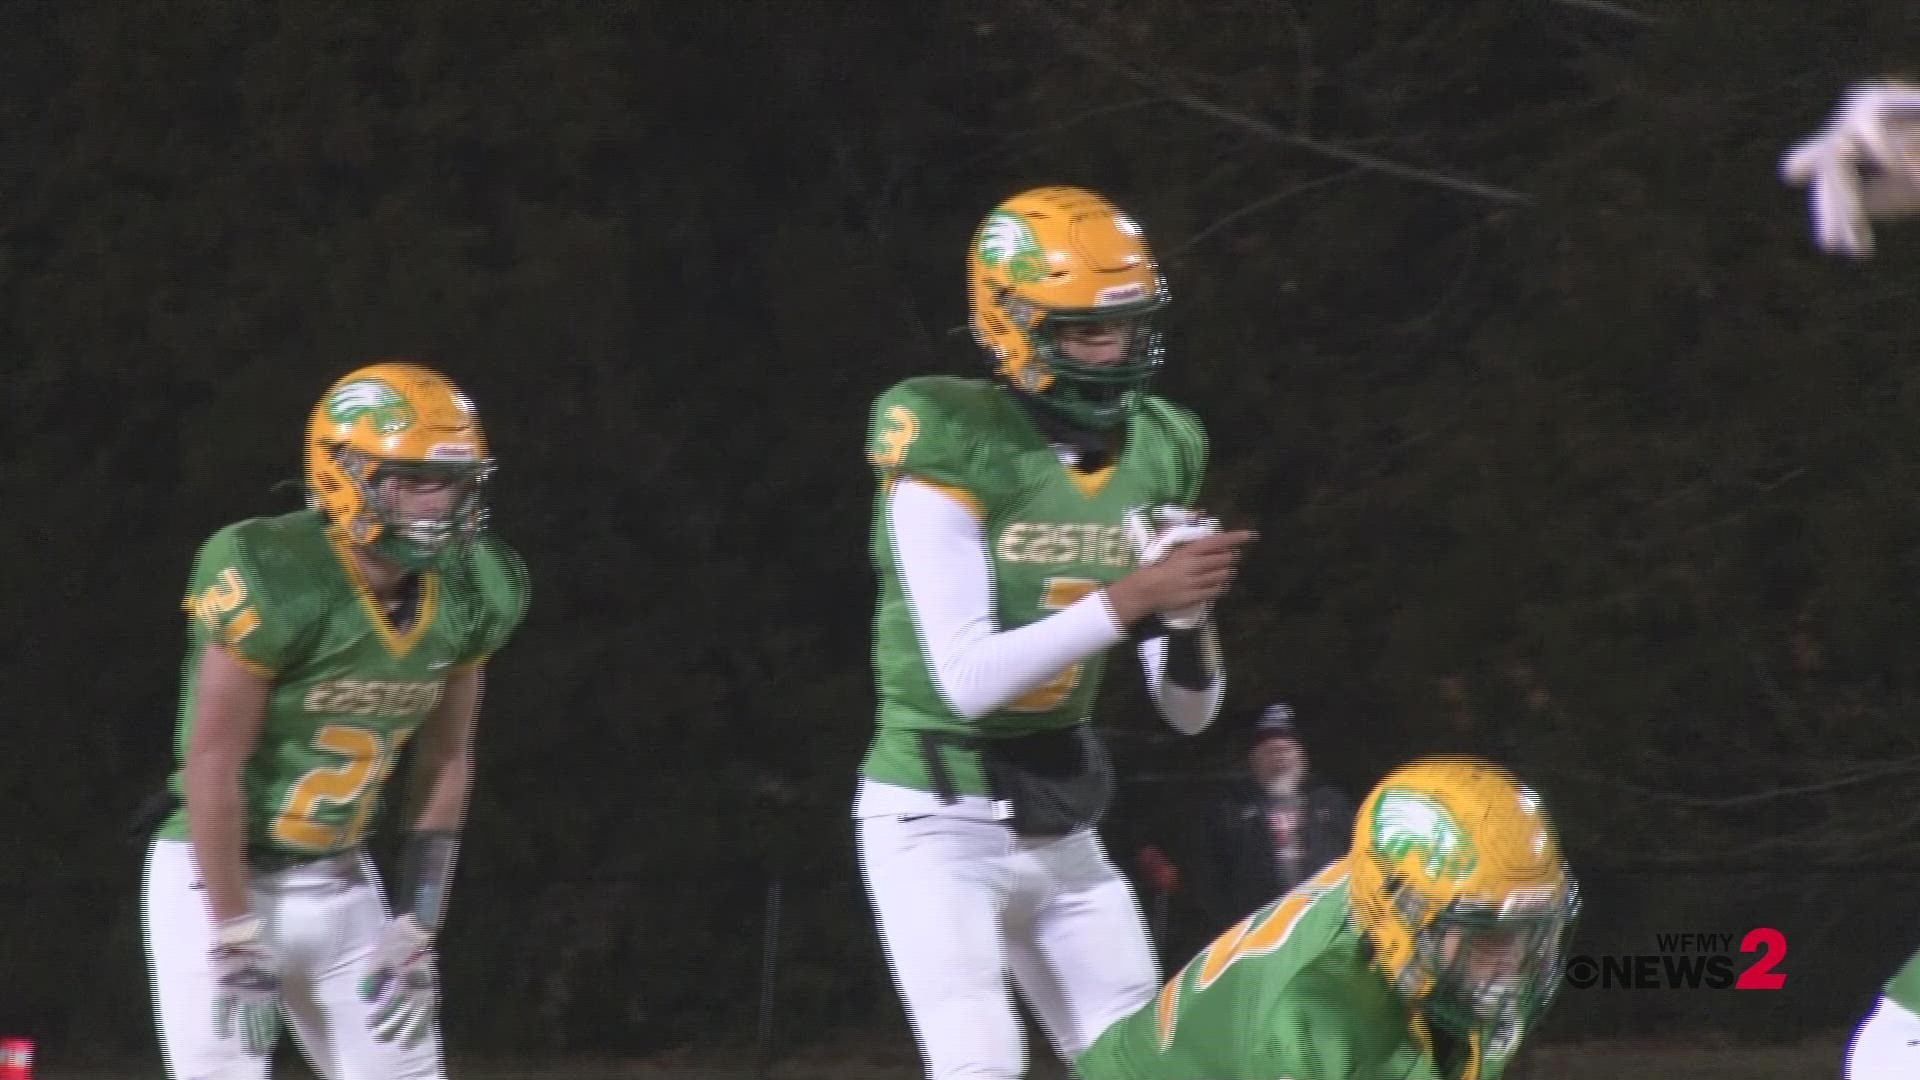 Early highlights from Jacksonville vs Eastern Alamance in the 4th round of the playoffs.